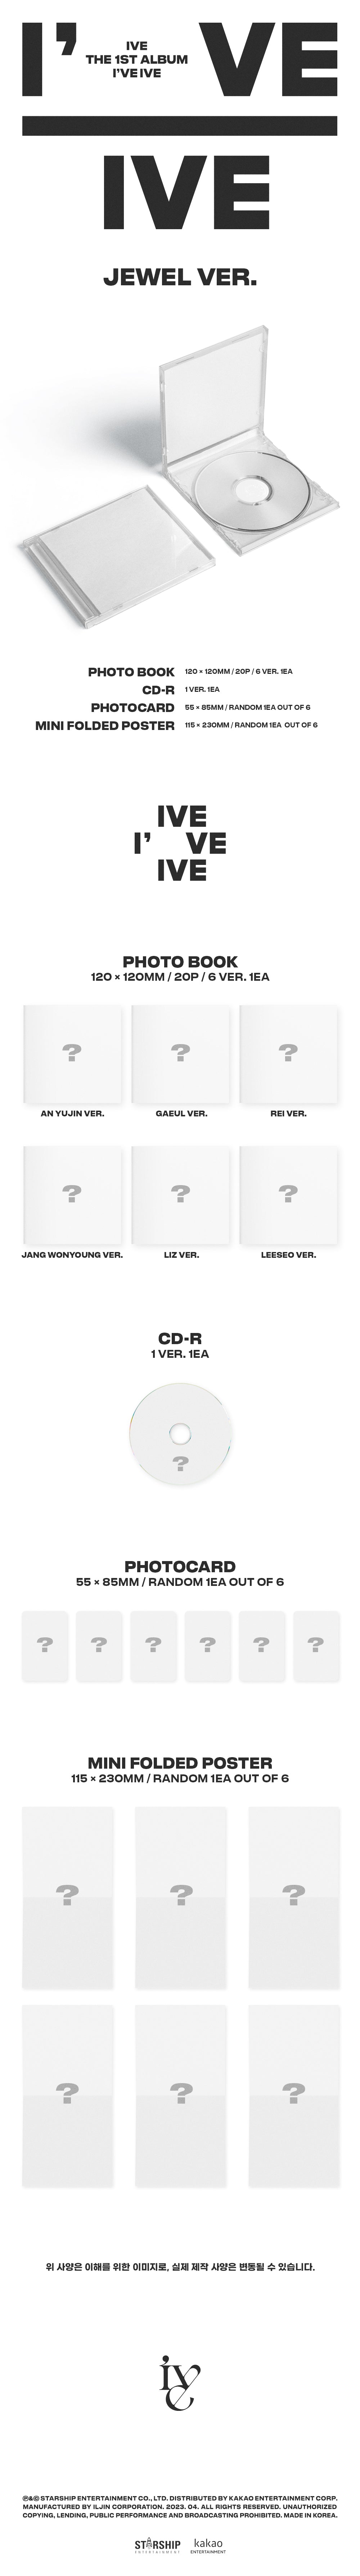 UK Free Tracked Shipping for IVE 1st Album [I've IVE] KITSCH Jewel Case (Limited Edition) photocard for sale.  Buy from a huge collection of official merch at the best online kpop store marketplace in Manchester UK Europe. Buy BTS BT21 TWICE & TXT at our k-pop shop. Tomorrow X Together. Hanteo & Circle Korean charts.